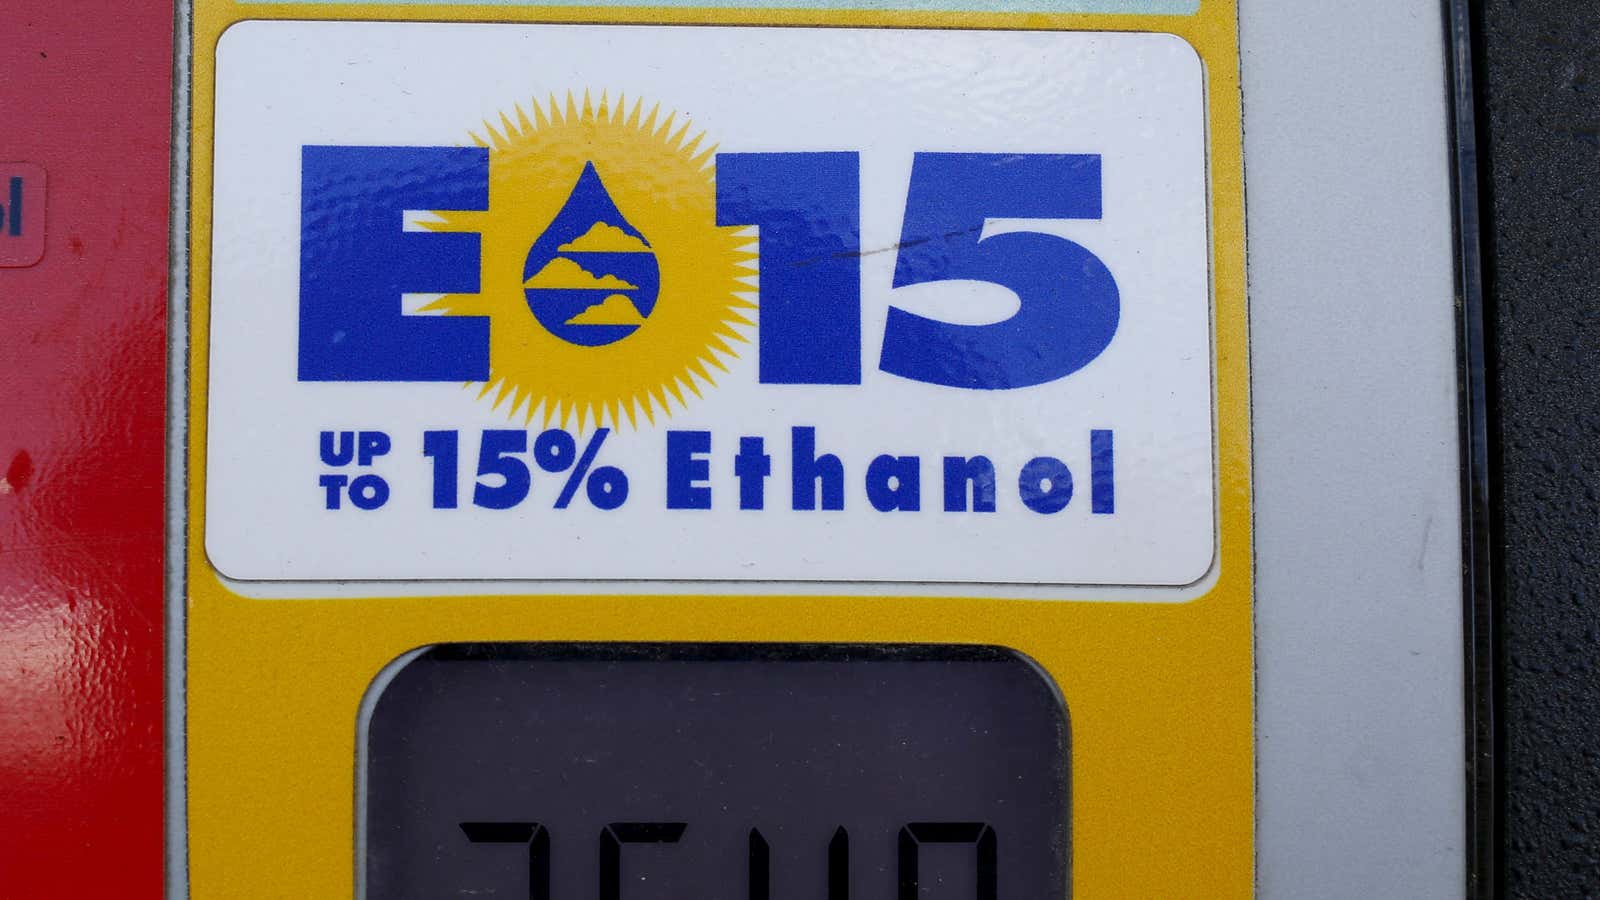 A gas pump cheerily advertises E15 gas, which it clarifies contains “up to 15% ethanol.”